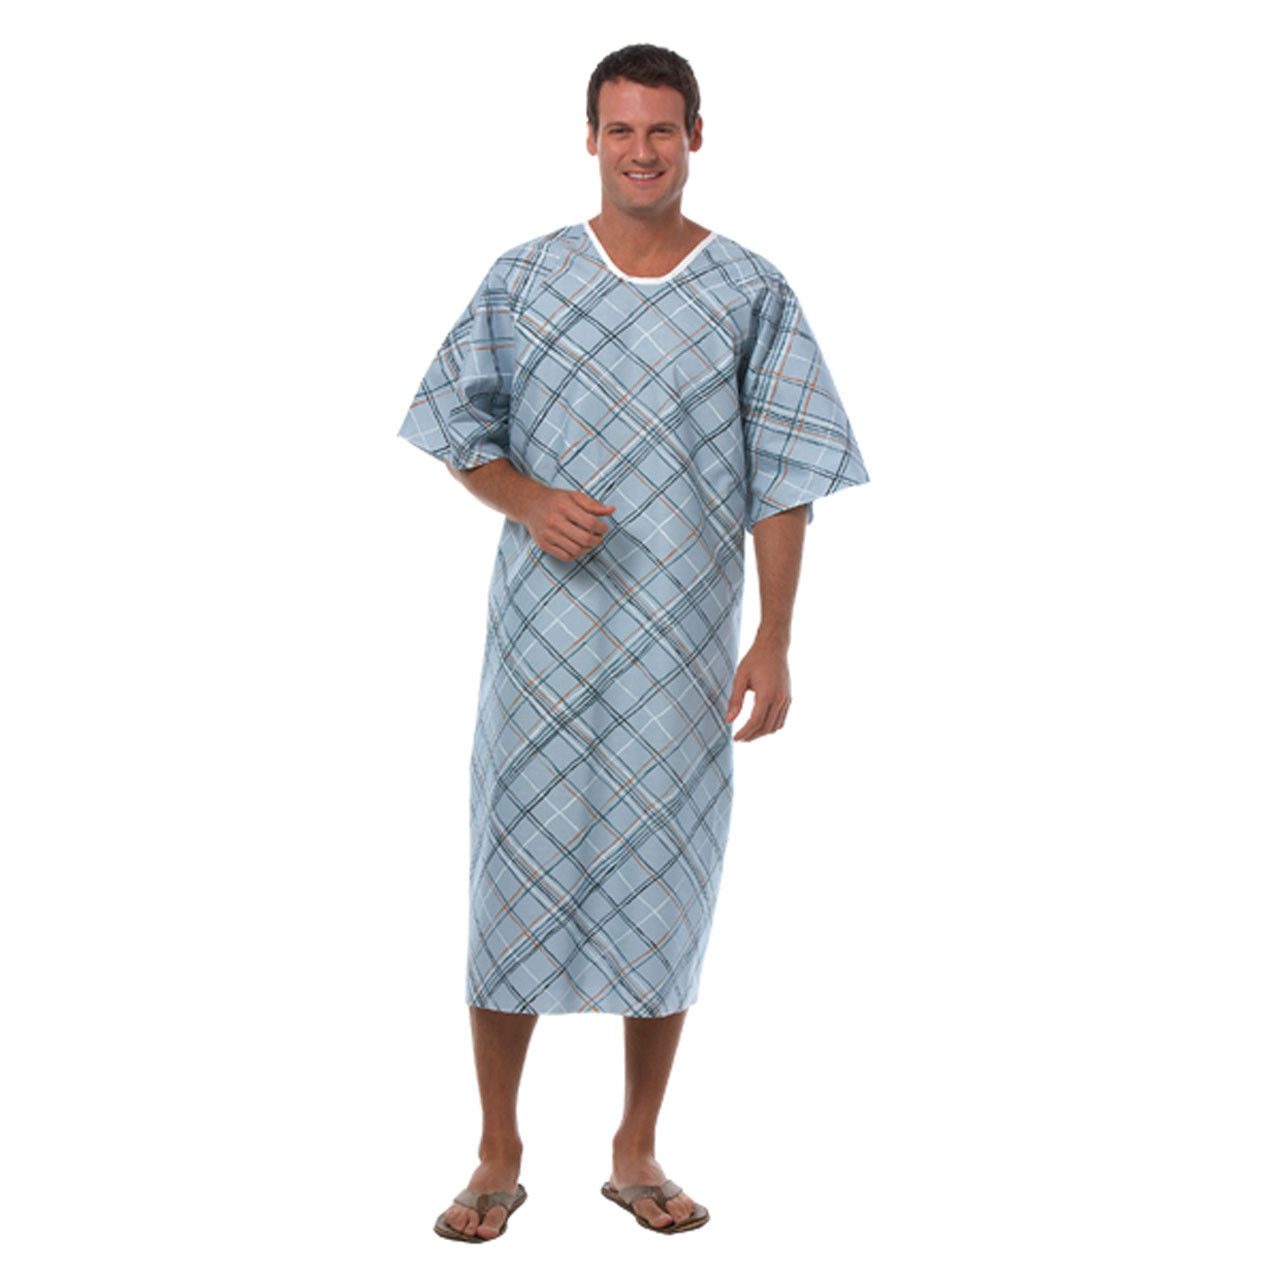 Are these hospital gowns for men comfortable?